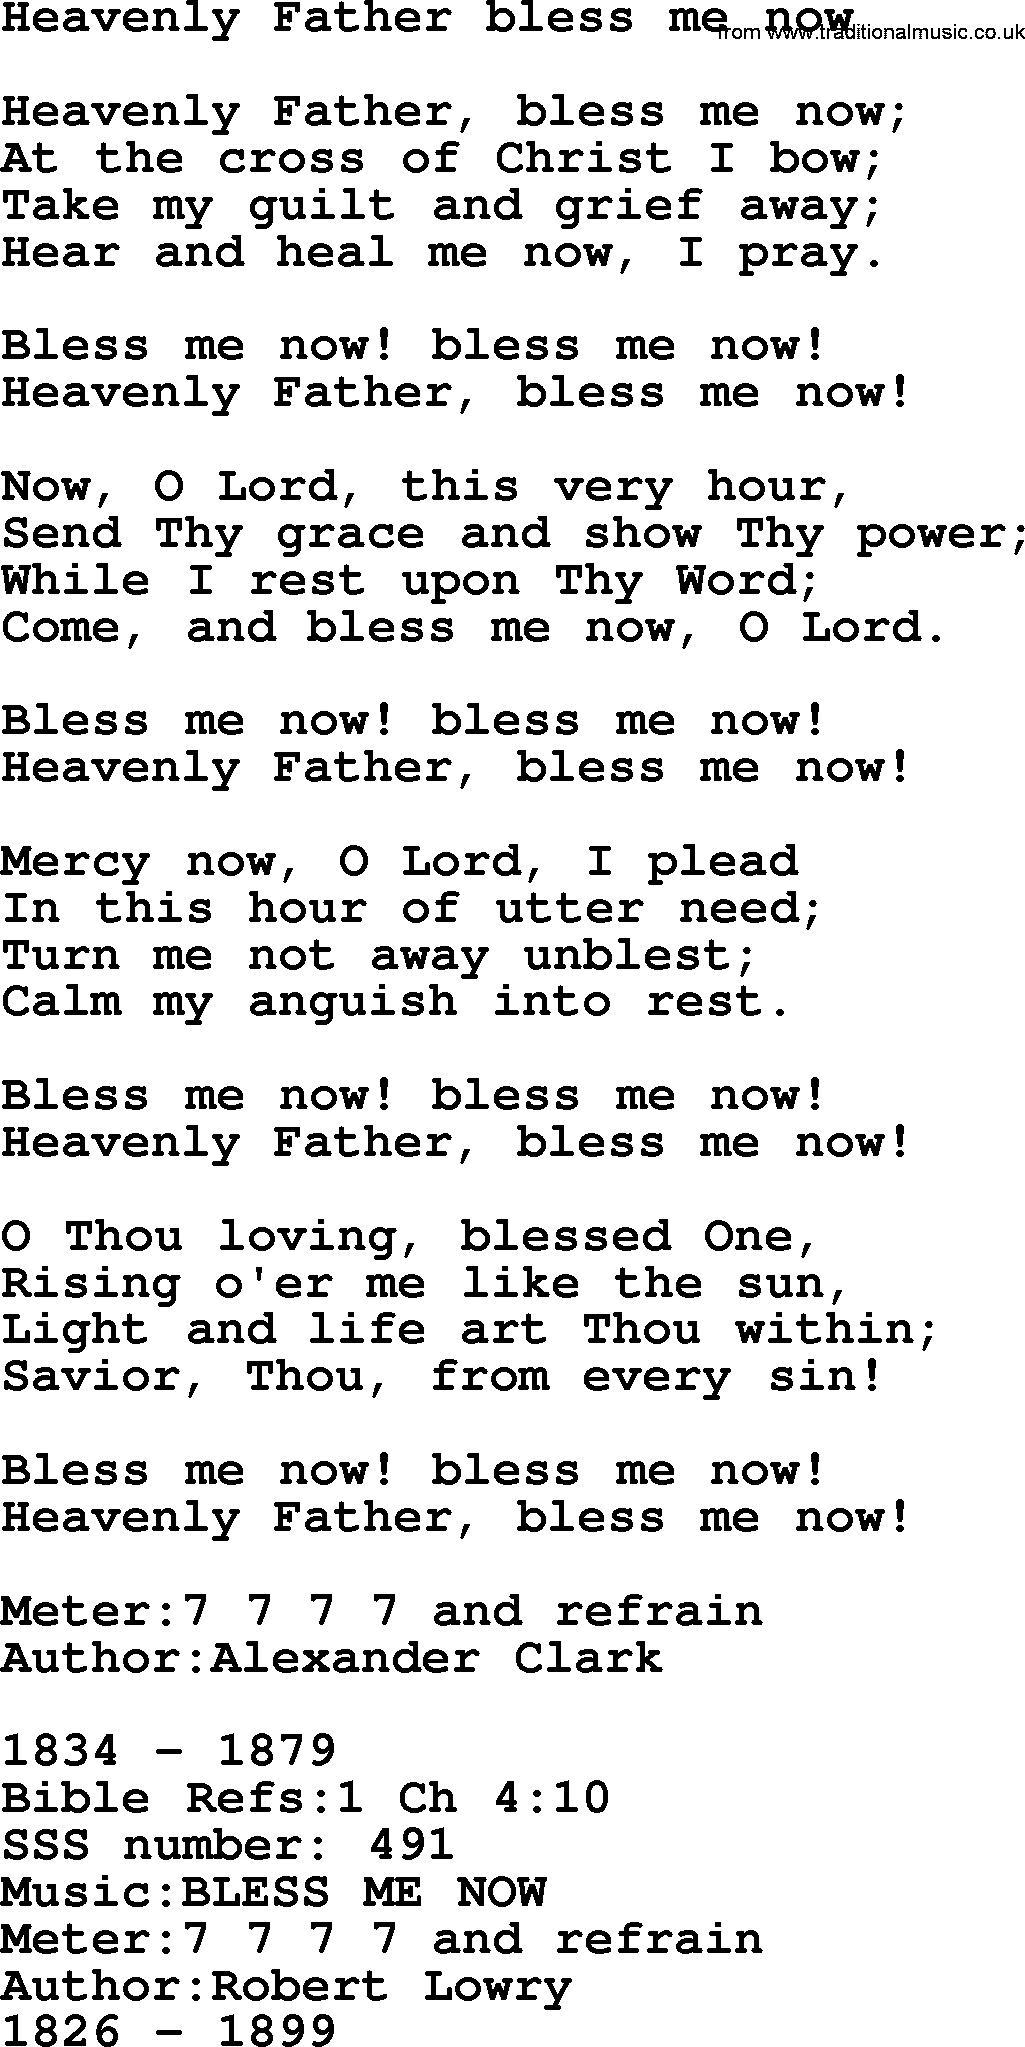 Sacred Songs and Solos complete, 1200 Hymns, title: Heavenly Father Bless Me Now, lyrics and PDF